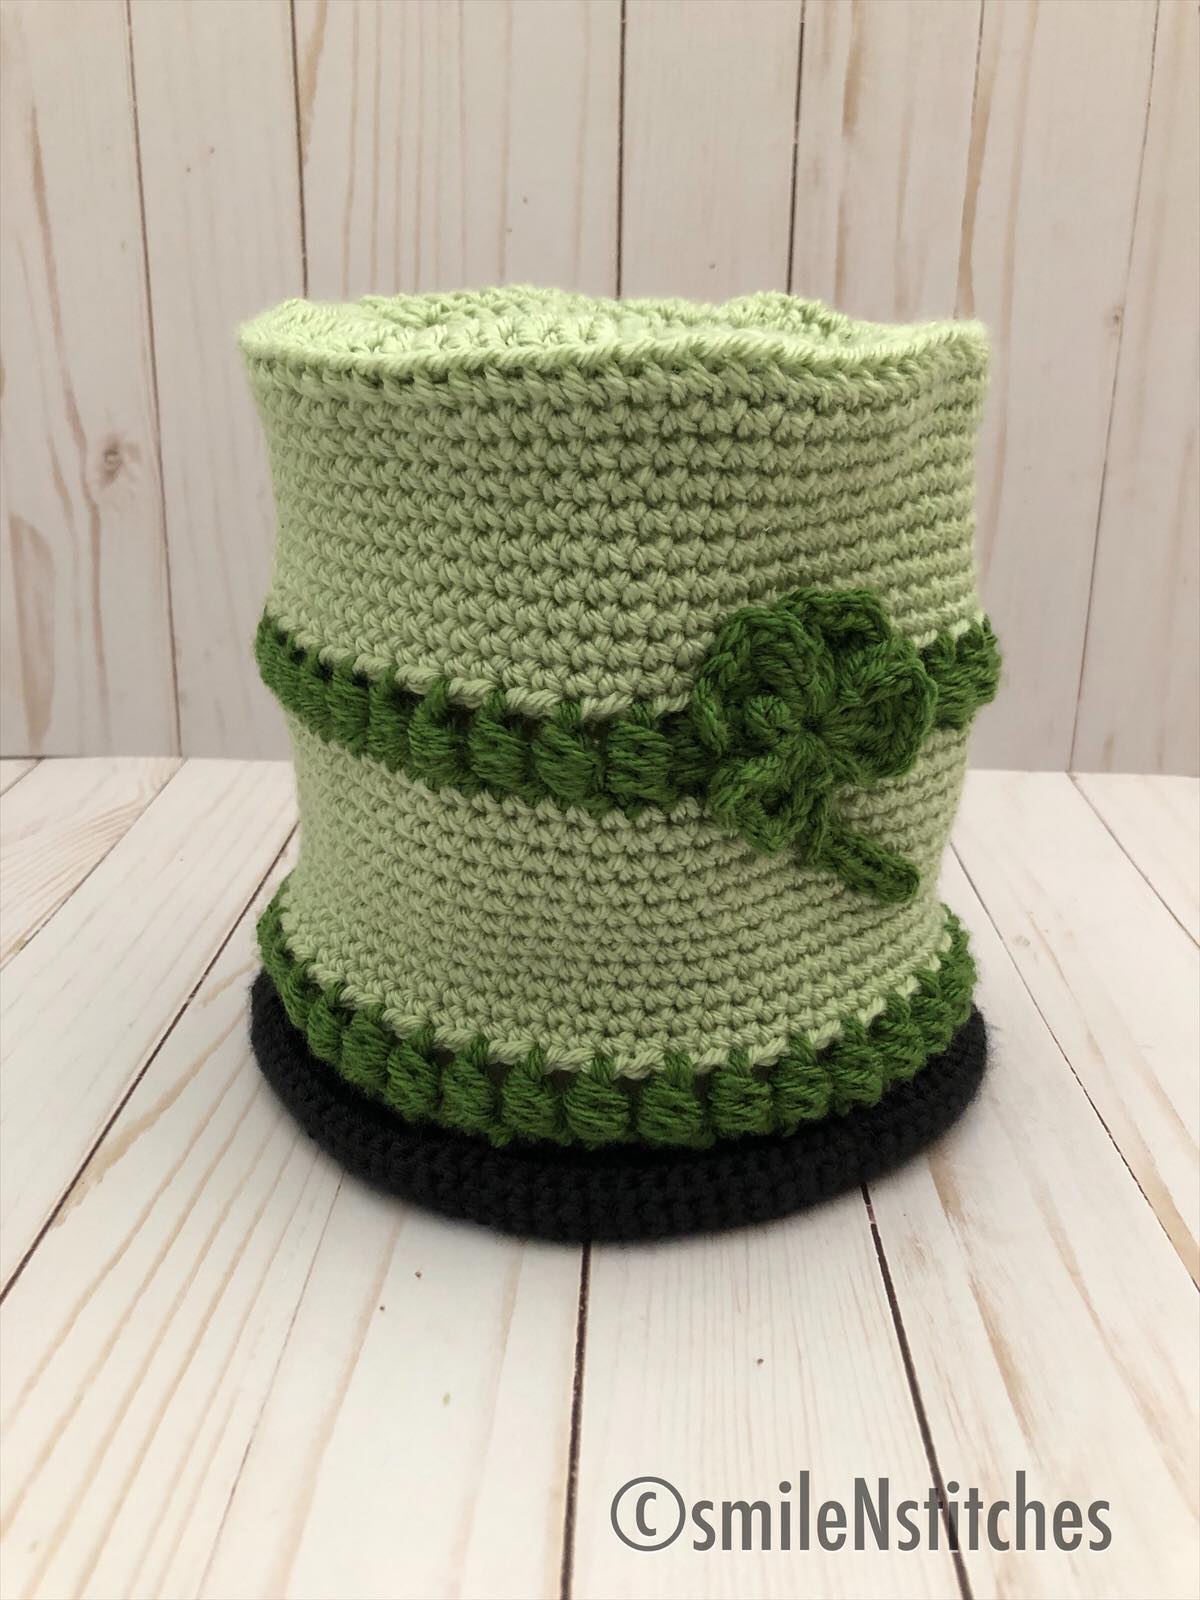 Easy Crochet Top Hat for St. Patrick's Day with Shamrock Appliqué by www.itchinforsomestitchin.com